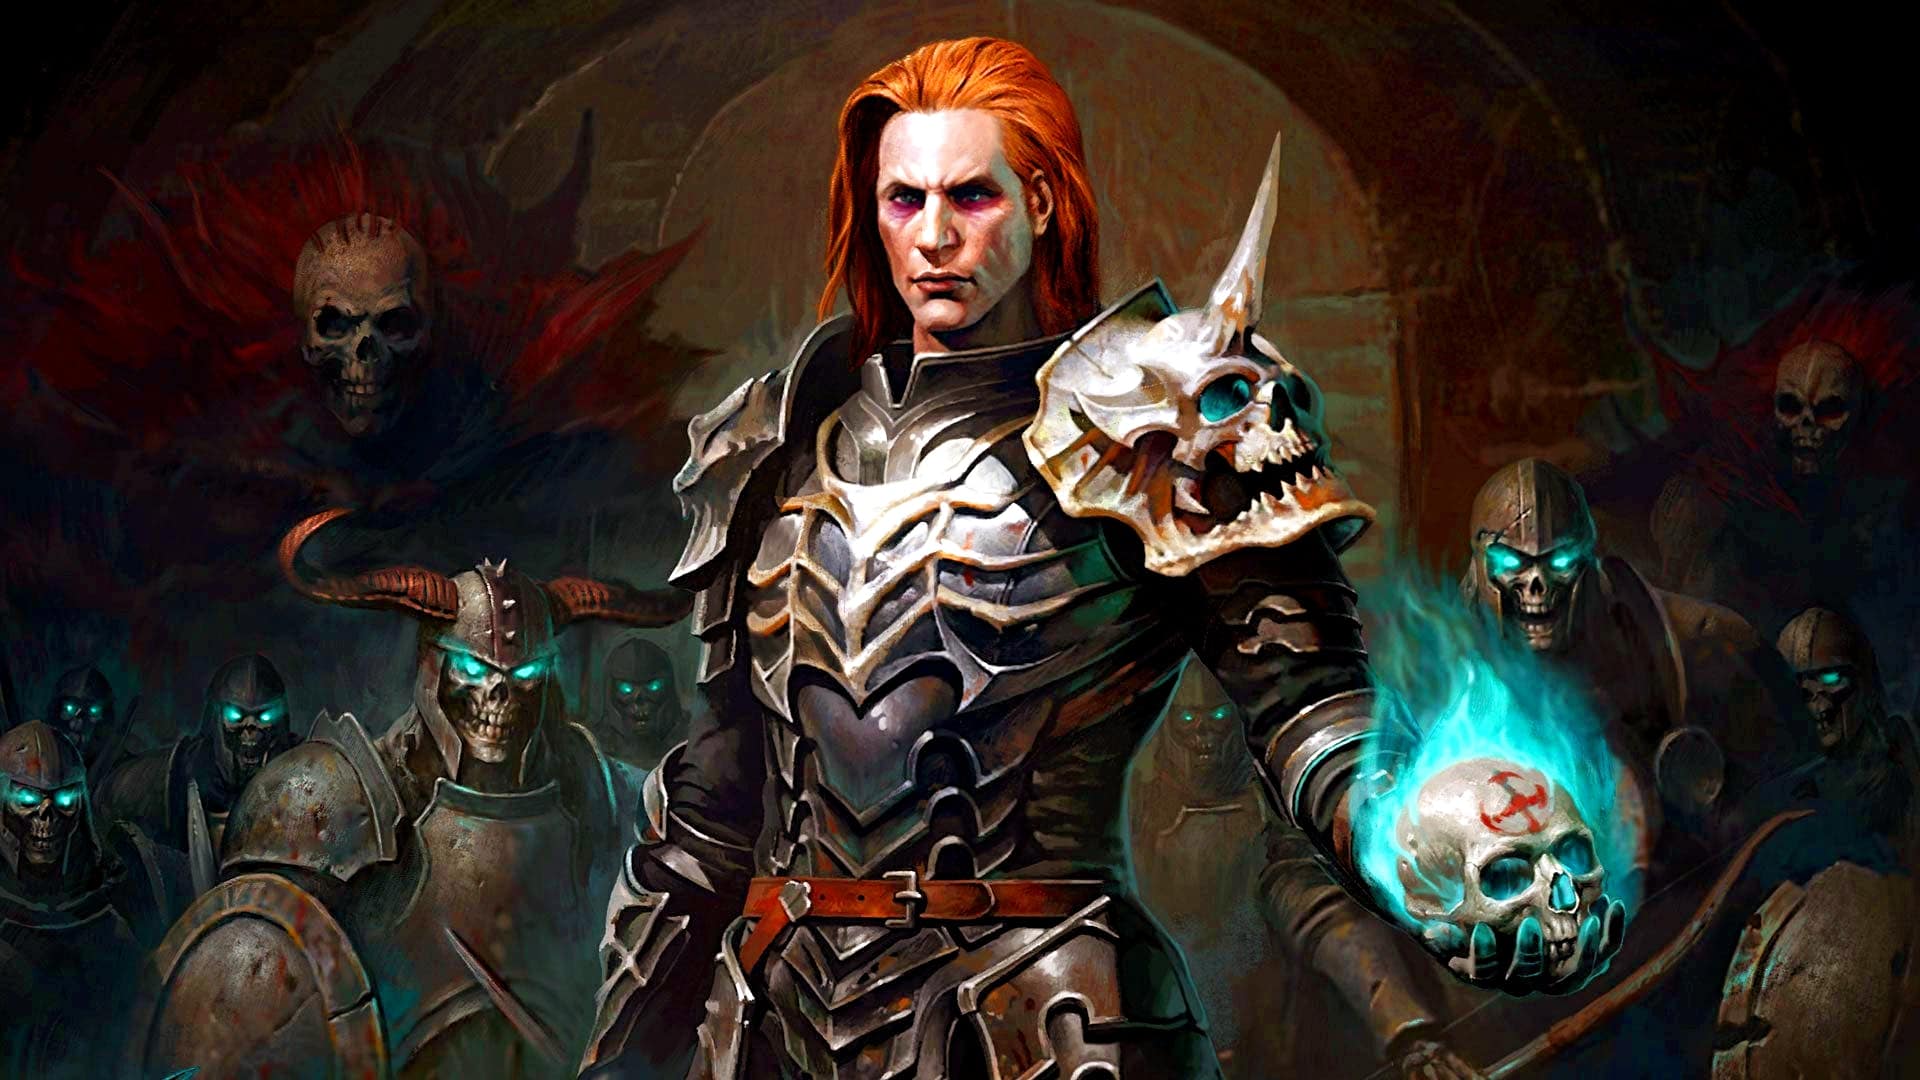 Diablo: Immortal disappoints utterly, Blizzard fully embraces pay2win